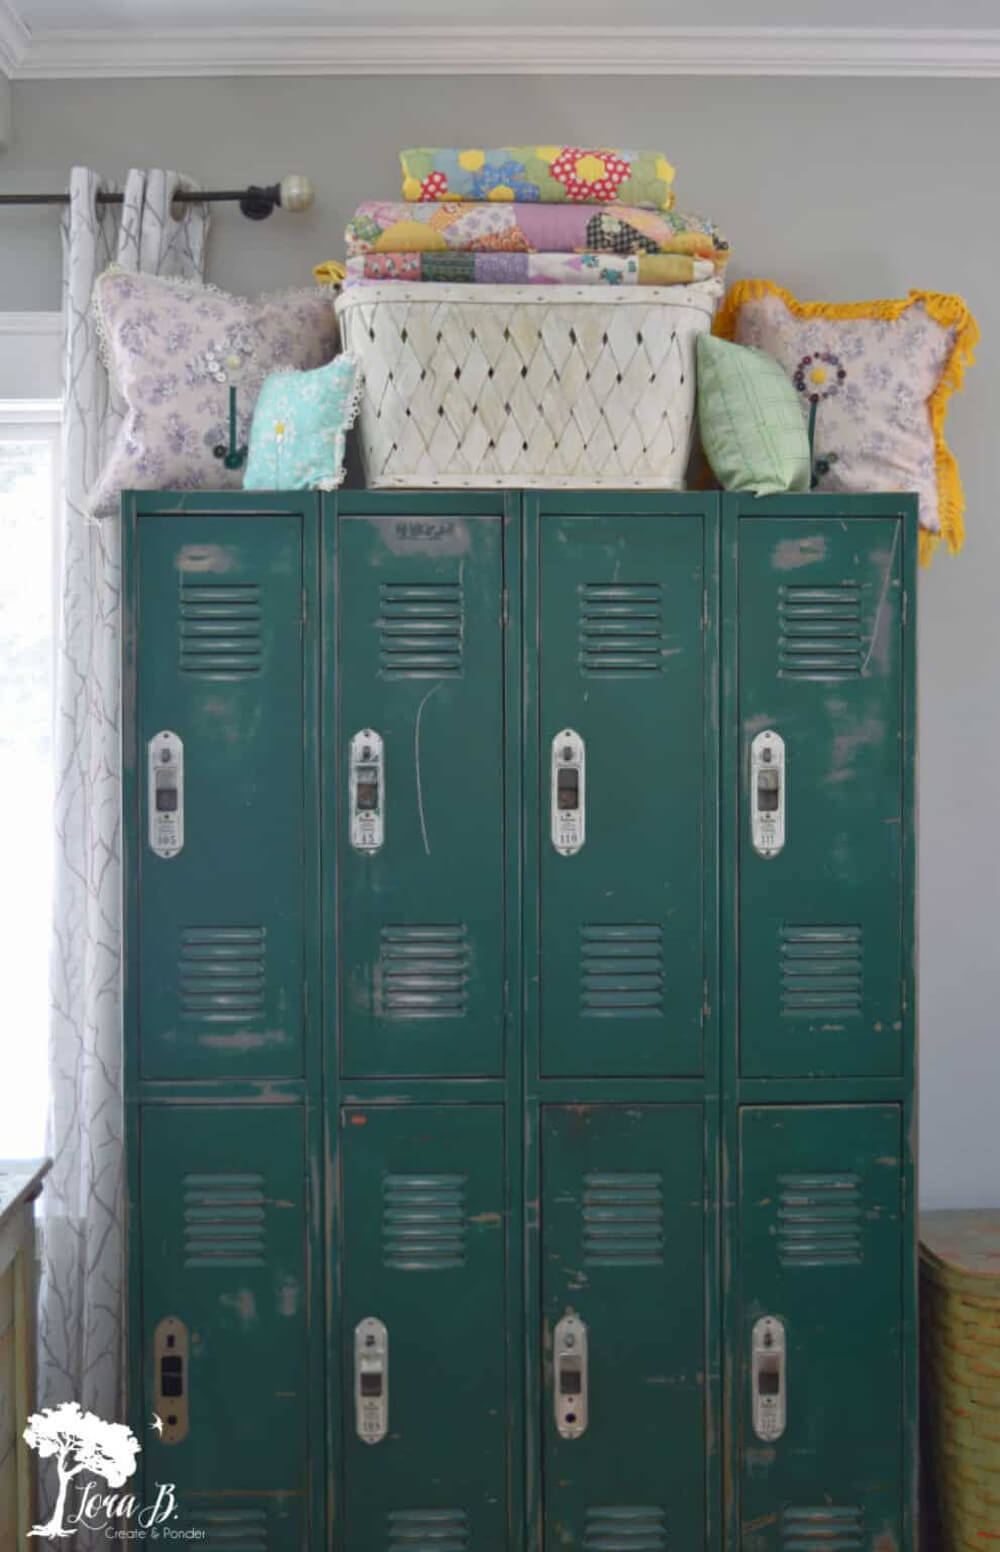 In Repurposing & Decorating With Vintage Linens, these are old school lockers with a vintage basket on top and vintage linens